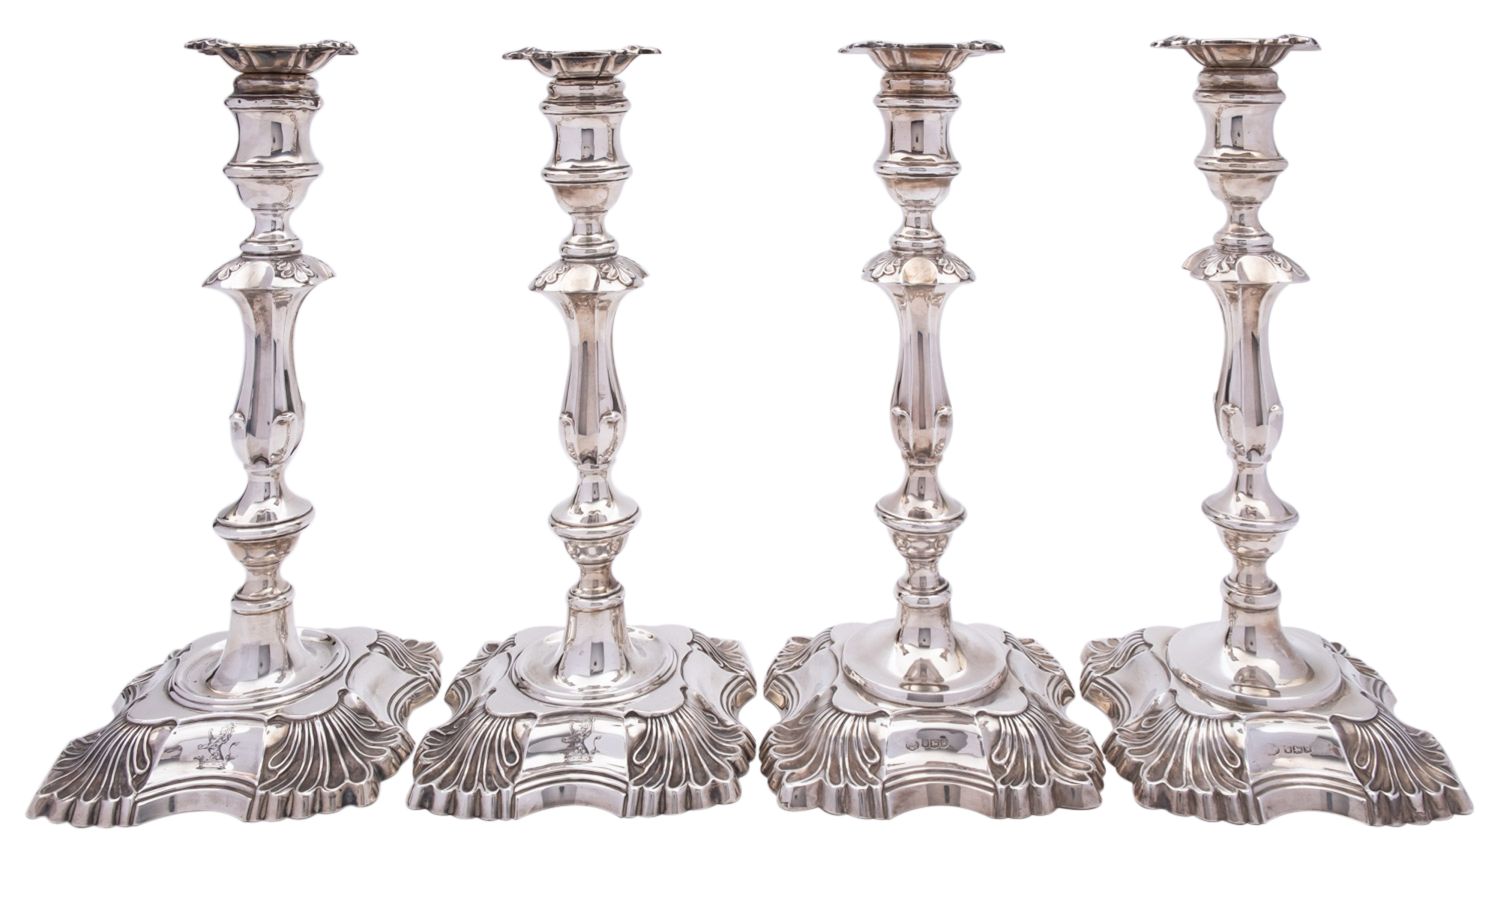 A pair of Victorian silver candlesticks by William Hutton & Son Ltd, London 1898,